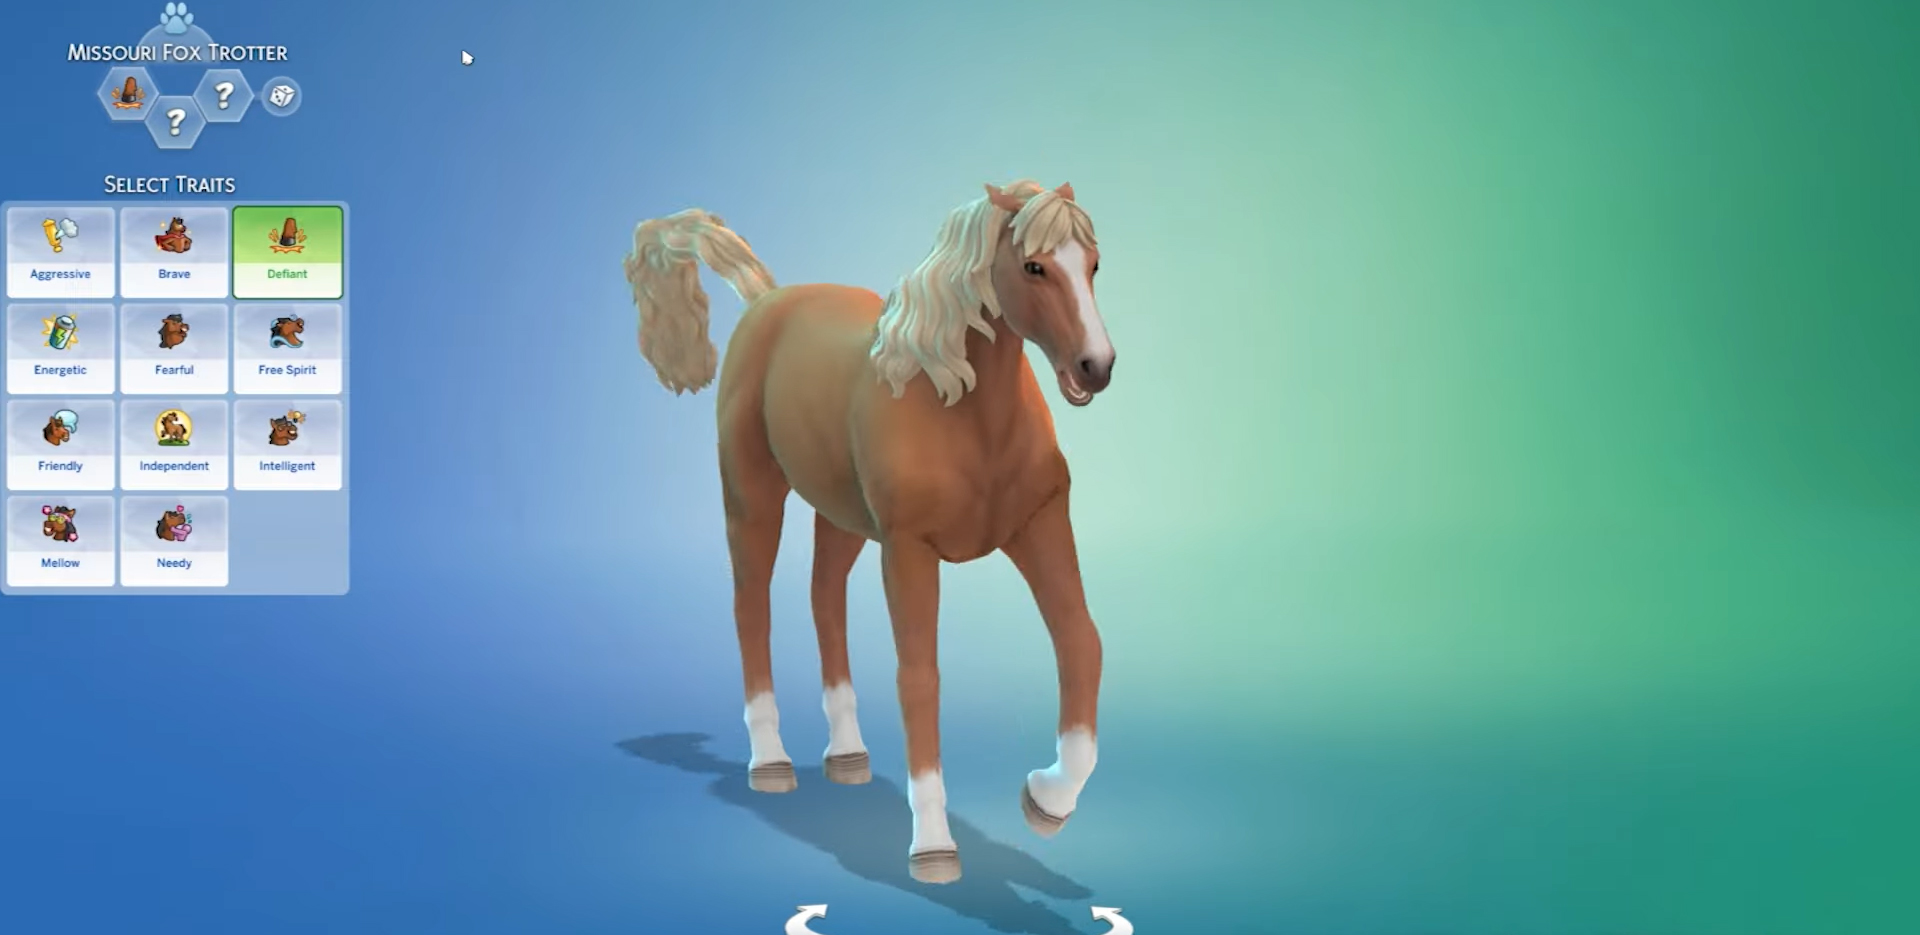 video-shows-11-different-traits-for-horses-in-new-ep-simsvip